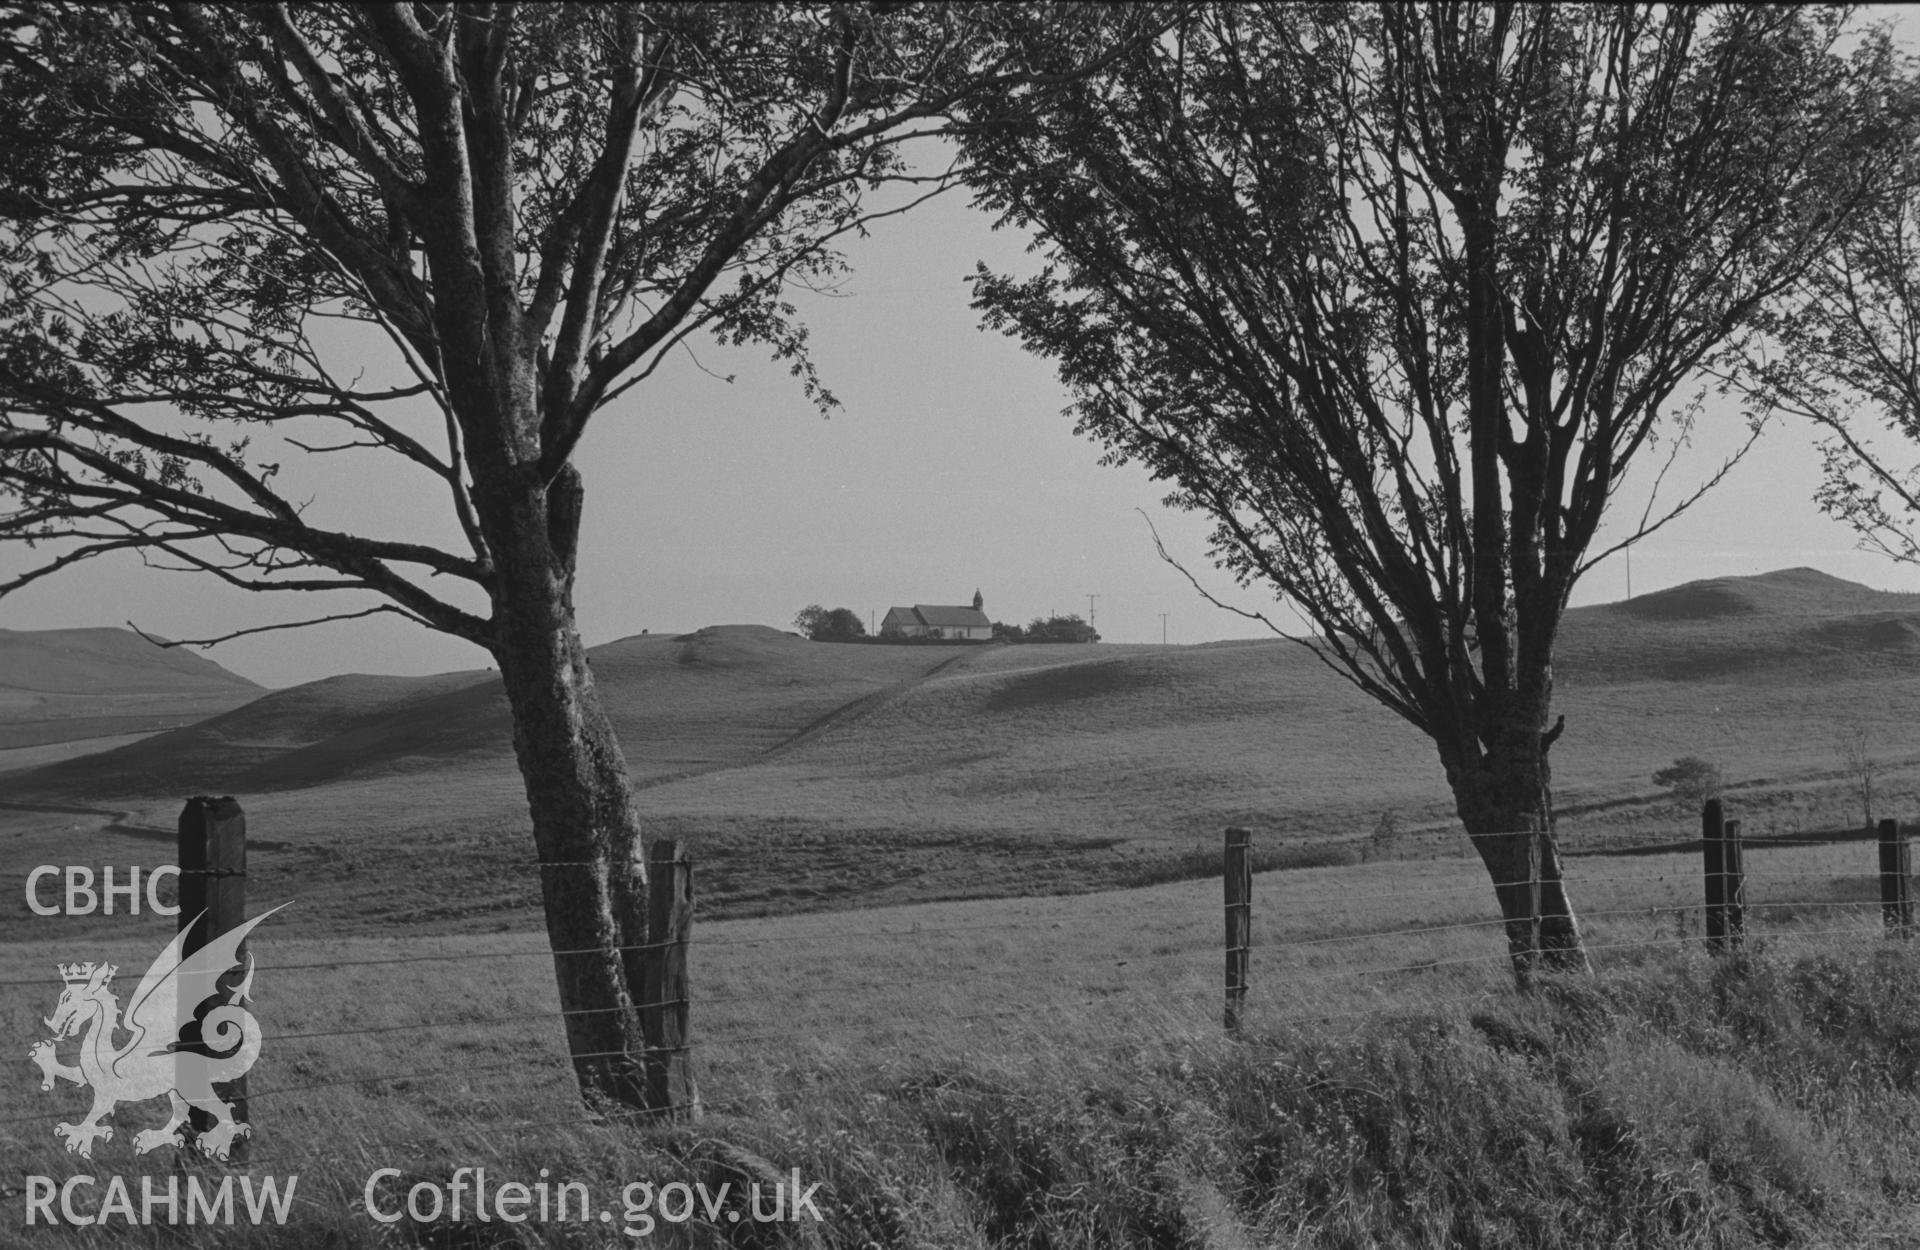 Digital copy of a black and white negative showing distant view of Llantrisant church in the evening light. Photographed by Arthur O. Chater in September 1966 looking south south west from the road to Devil's Bridge at Grid Reference SN 727 754.